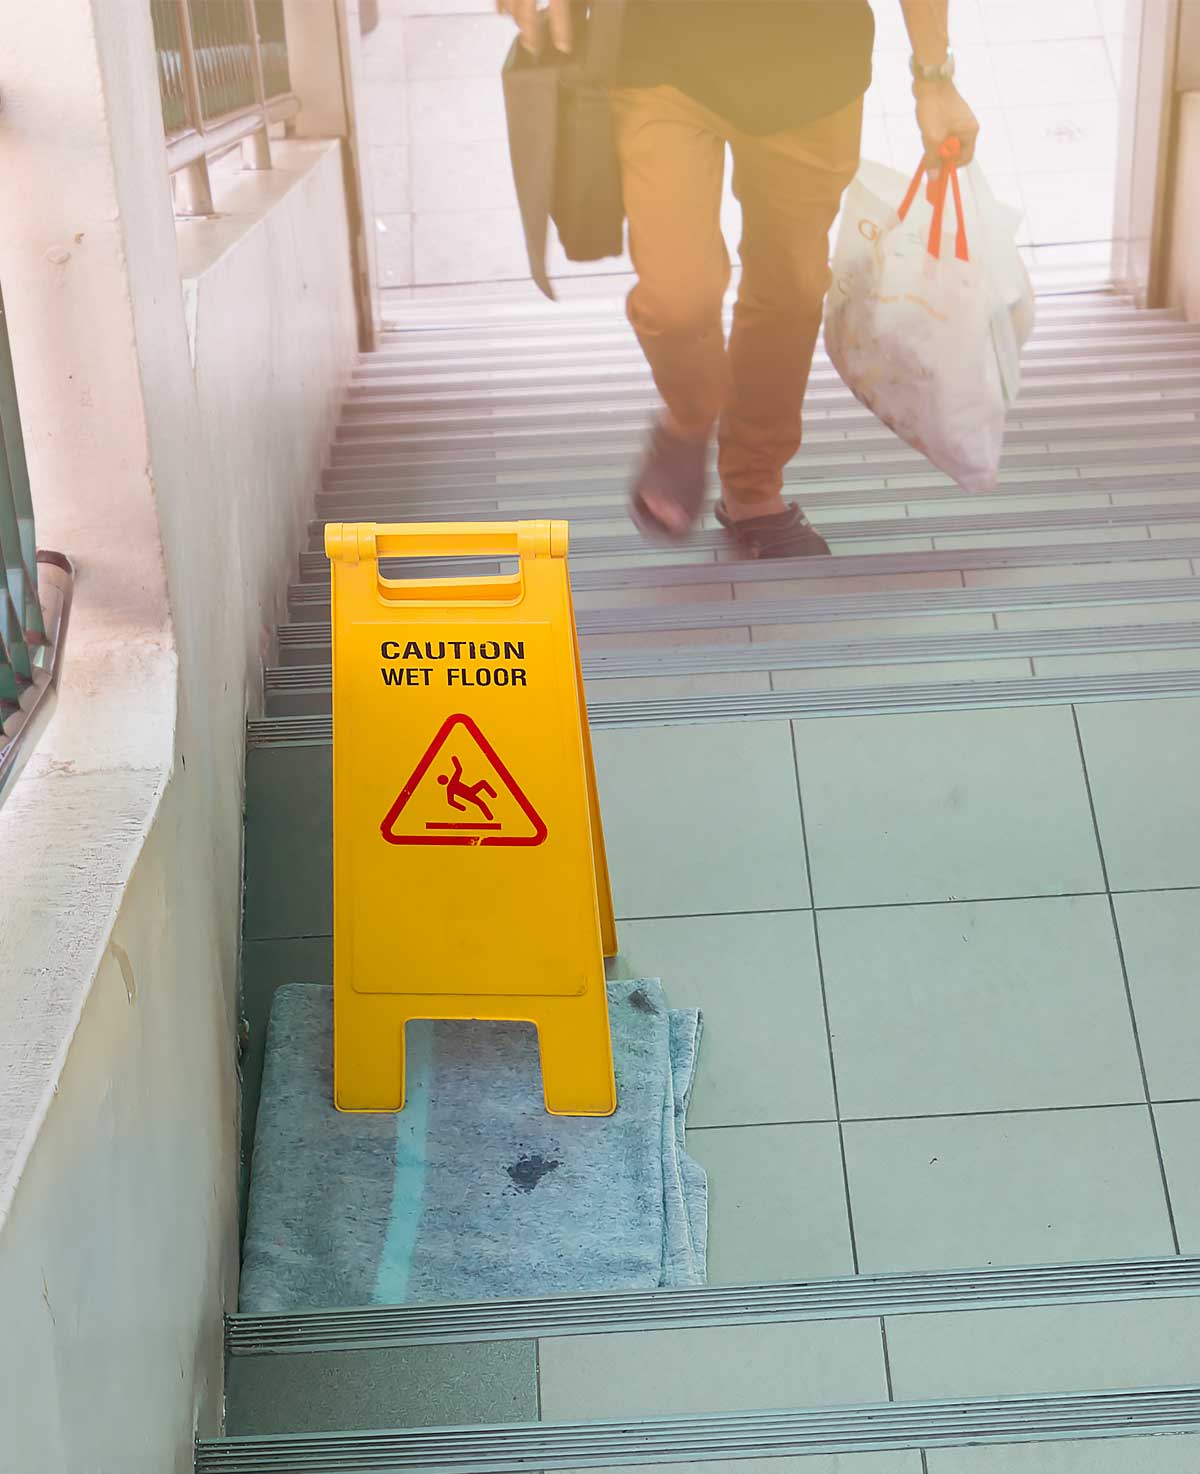 Premises Liability and Slip and Fall | Alana Anzalone Law Offices, LLC